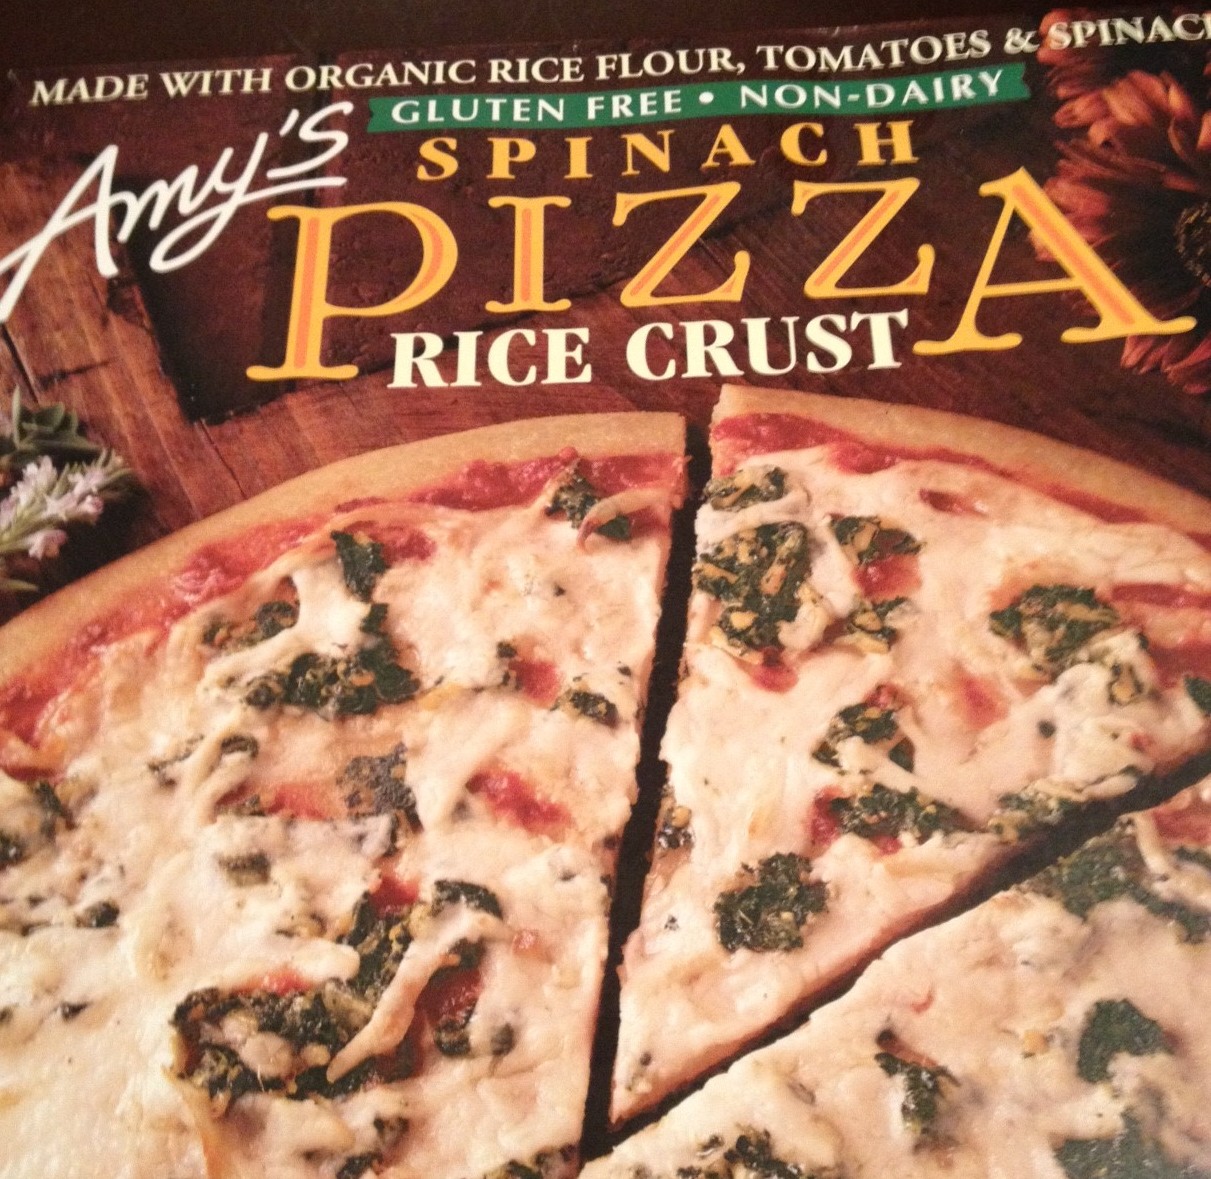 Amy’s Vegan Gluten-free Spinach Pizza with a Rice Crust